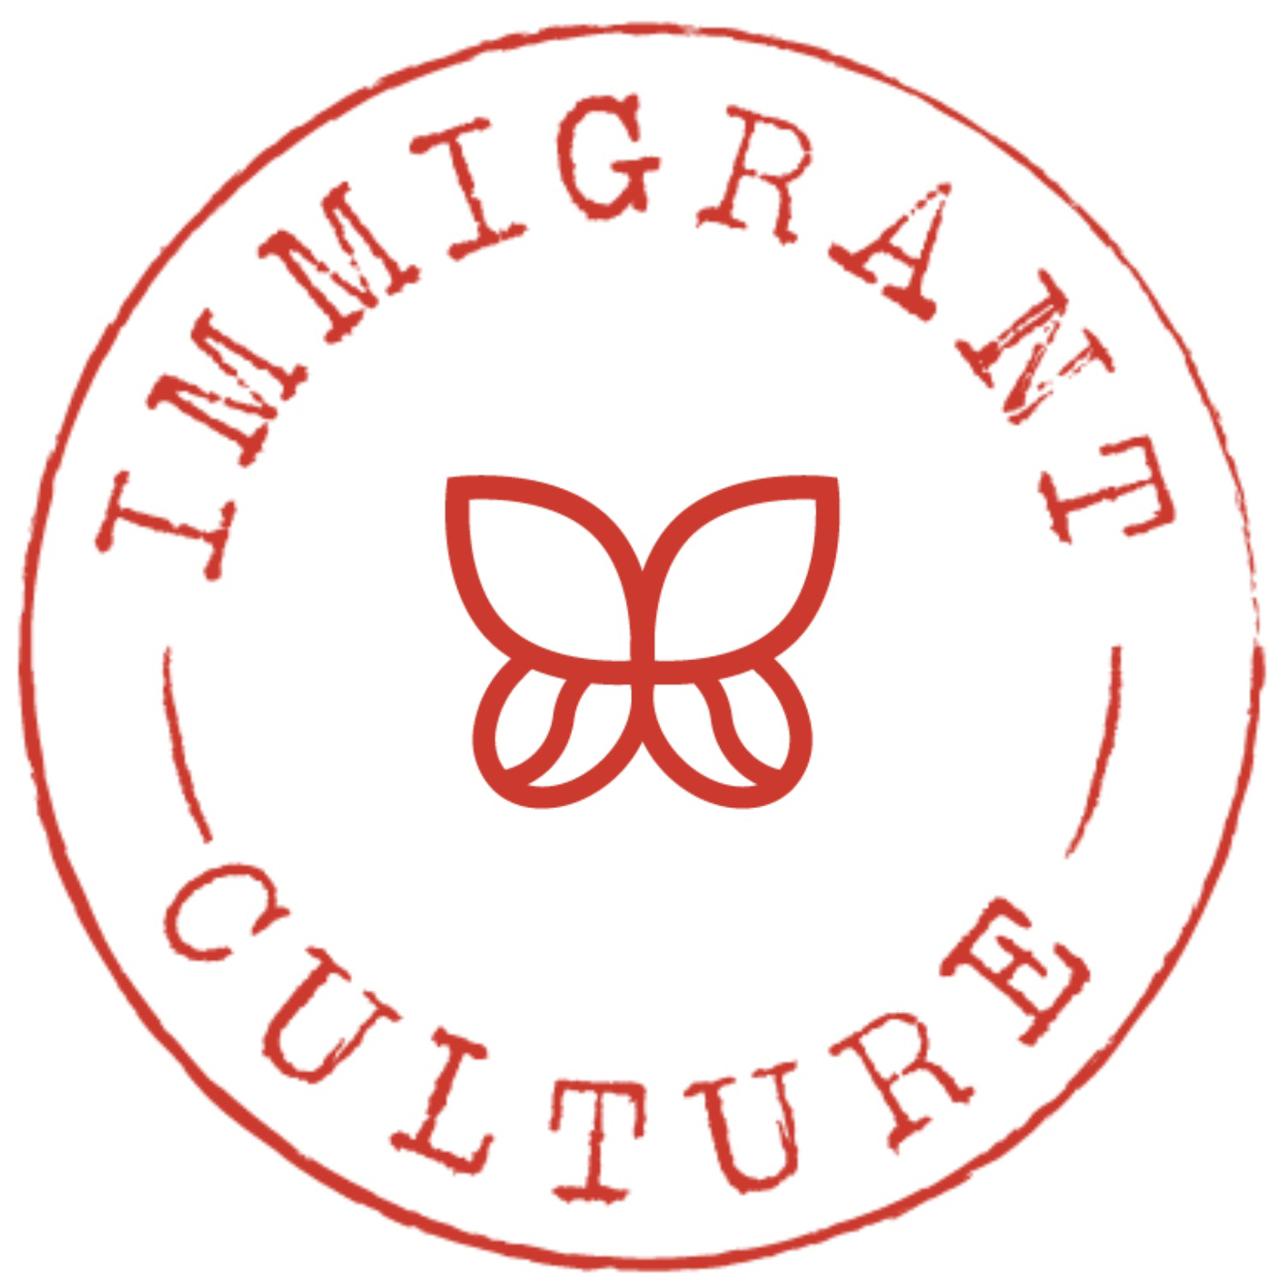 ImmigrantCultre's images